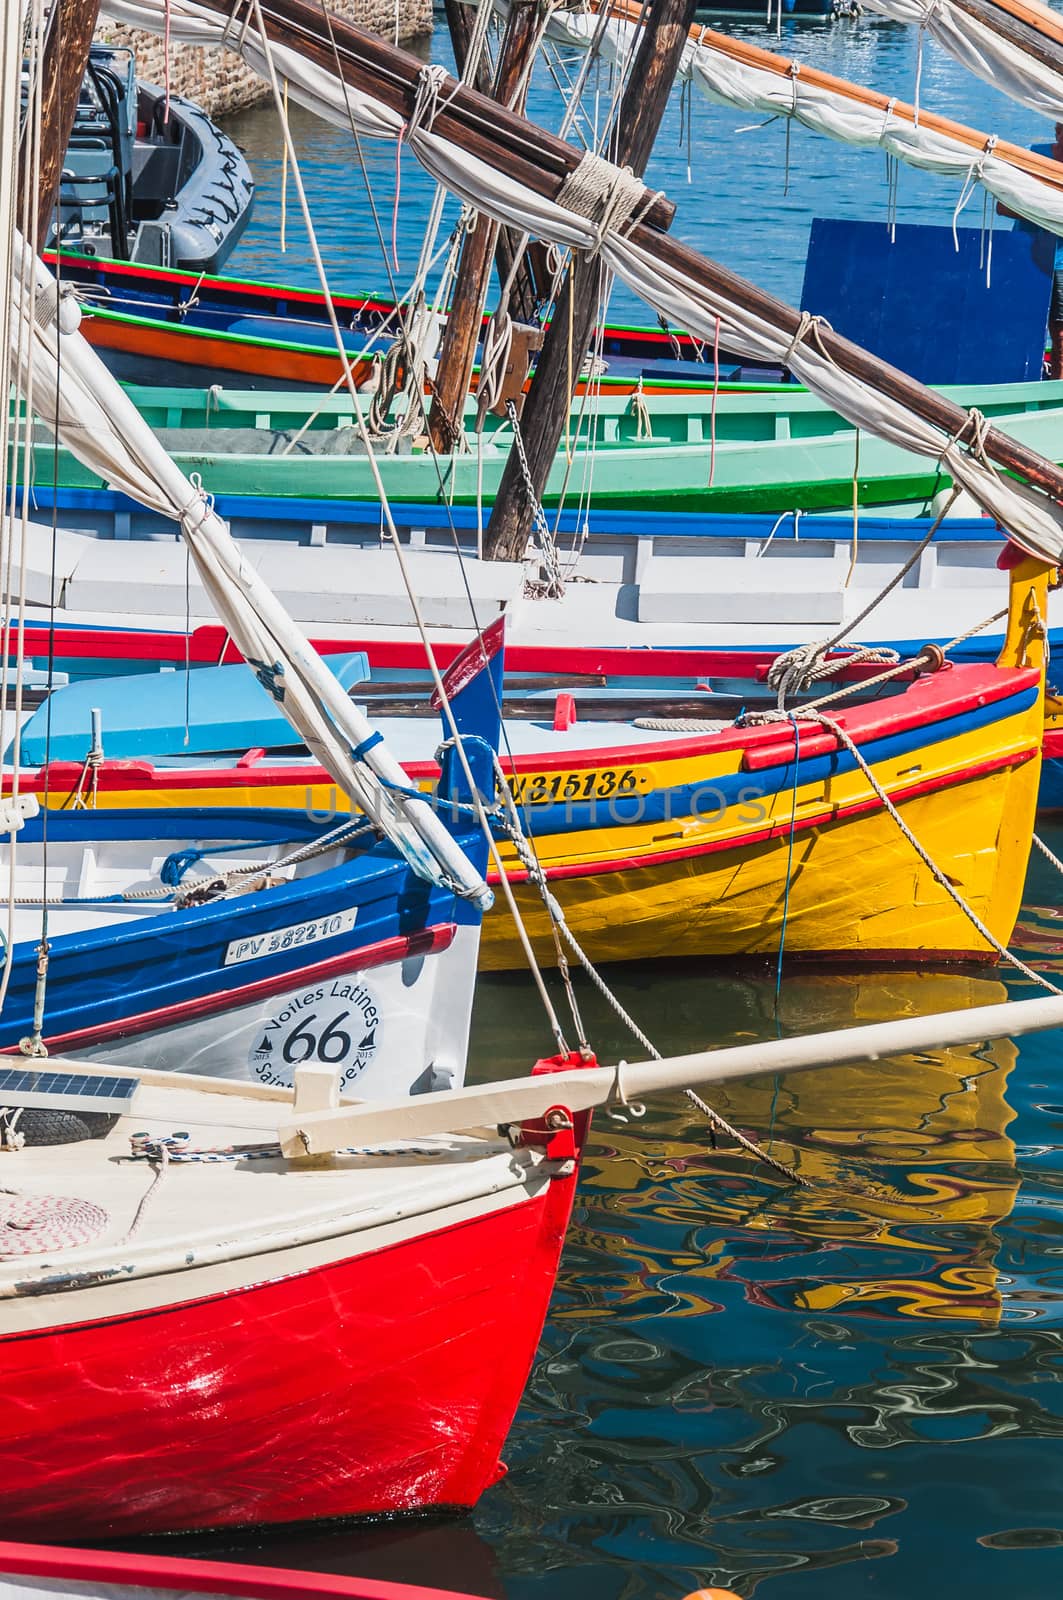 Picturesque view of sailboats in the port of Collioure, Pyrénées-Orientales, France